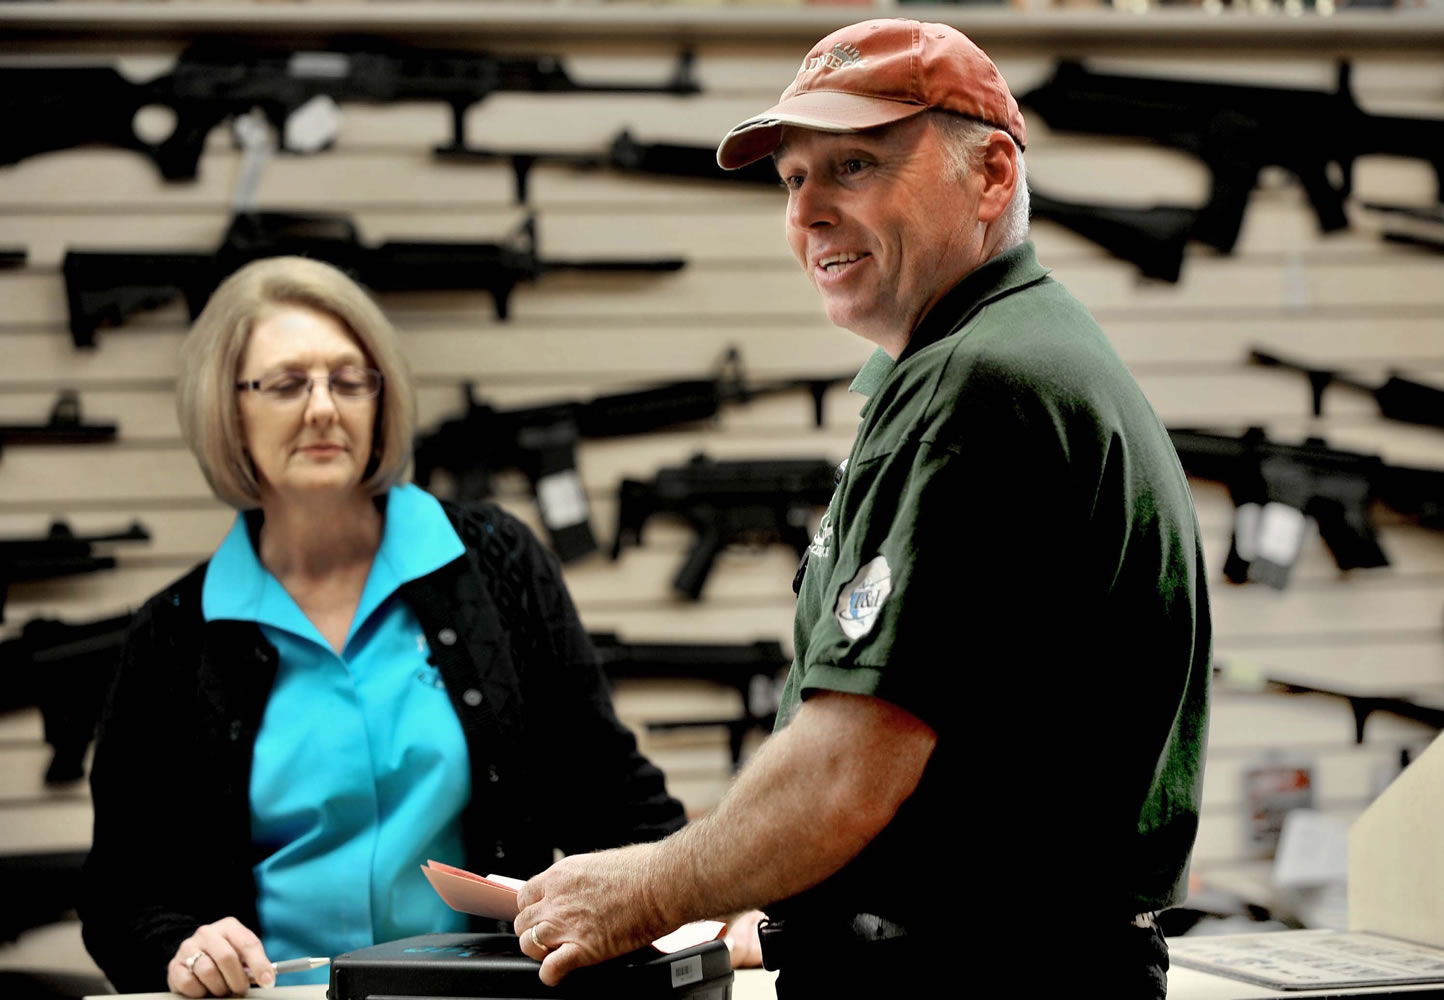 Mark Disque picks up a handgun he purchased from Becky Copley at Pasadena Pawn and Gun Store in Pasadena, Md., after waiting several weeks for approval on his background check.